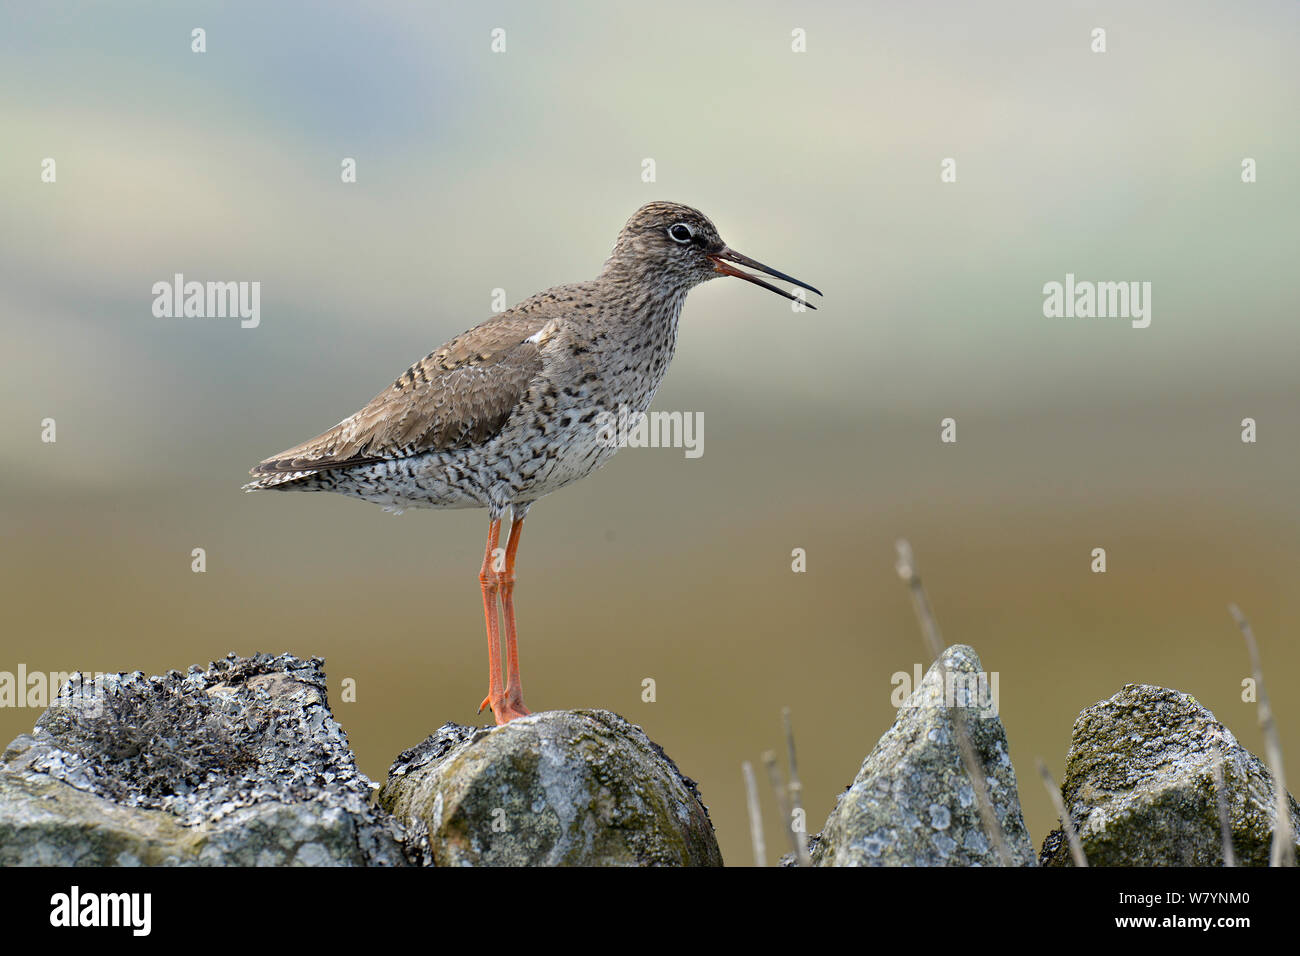 Redshank (Tringa totanus) calling from dry stone wall, Upper Teesdale, Co Durham, England, UK, May Stock Photo